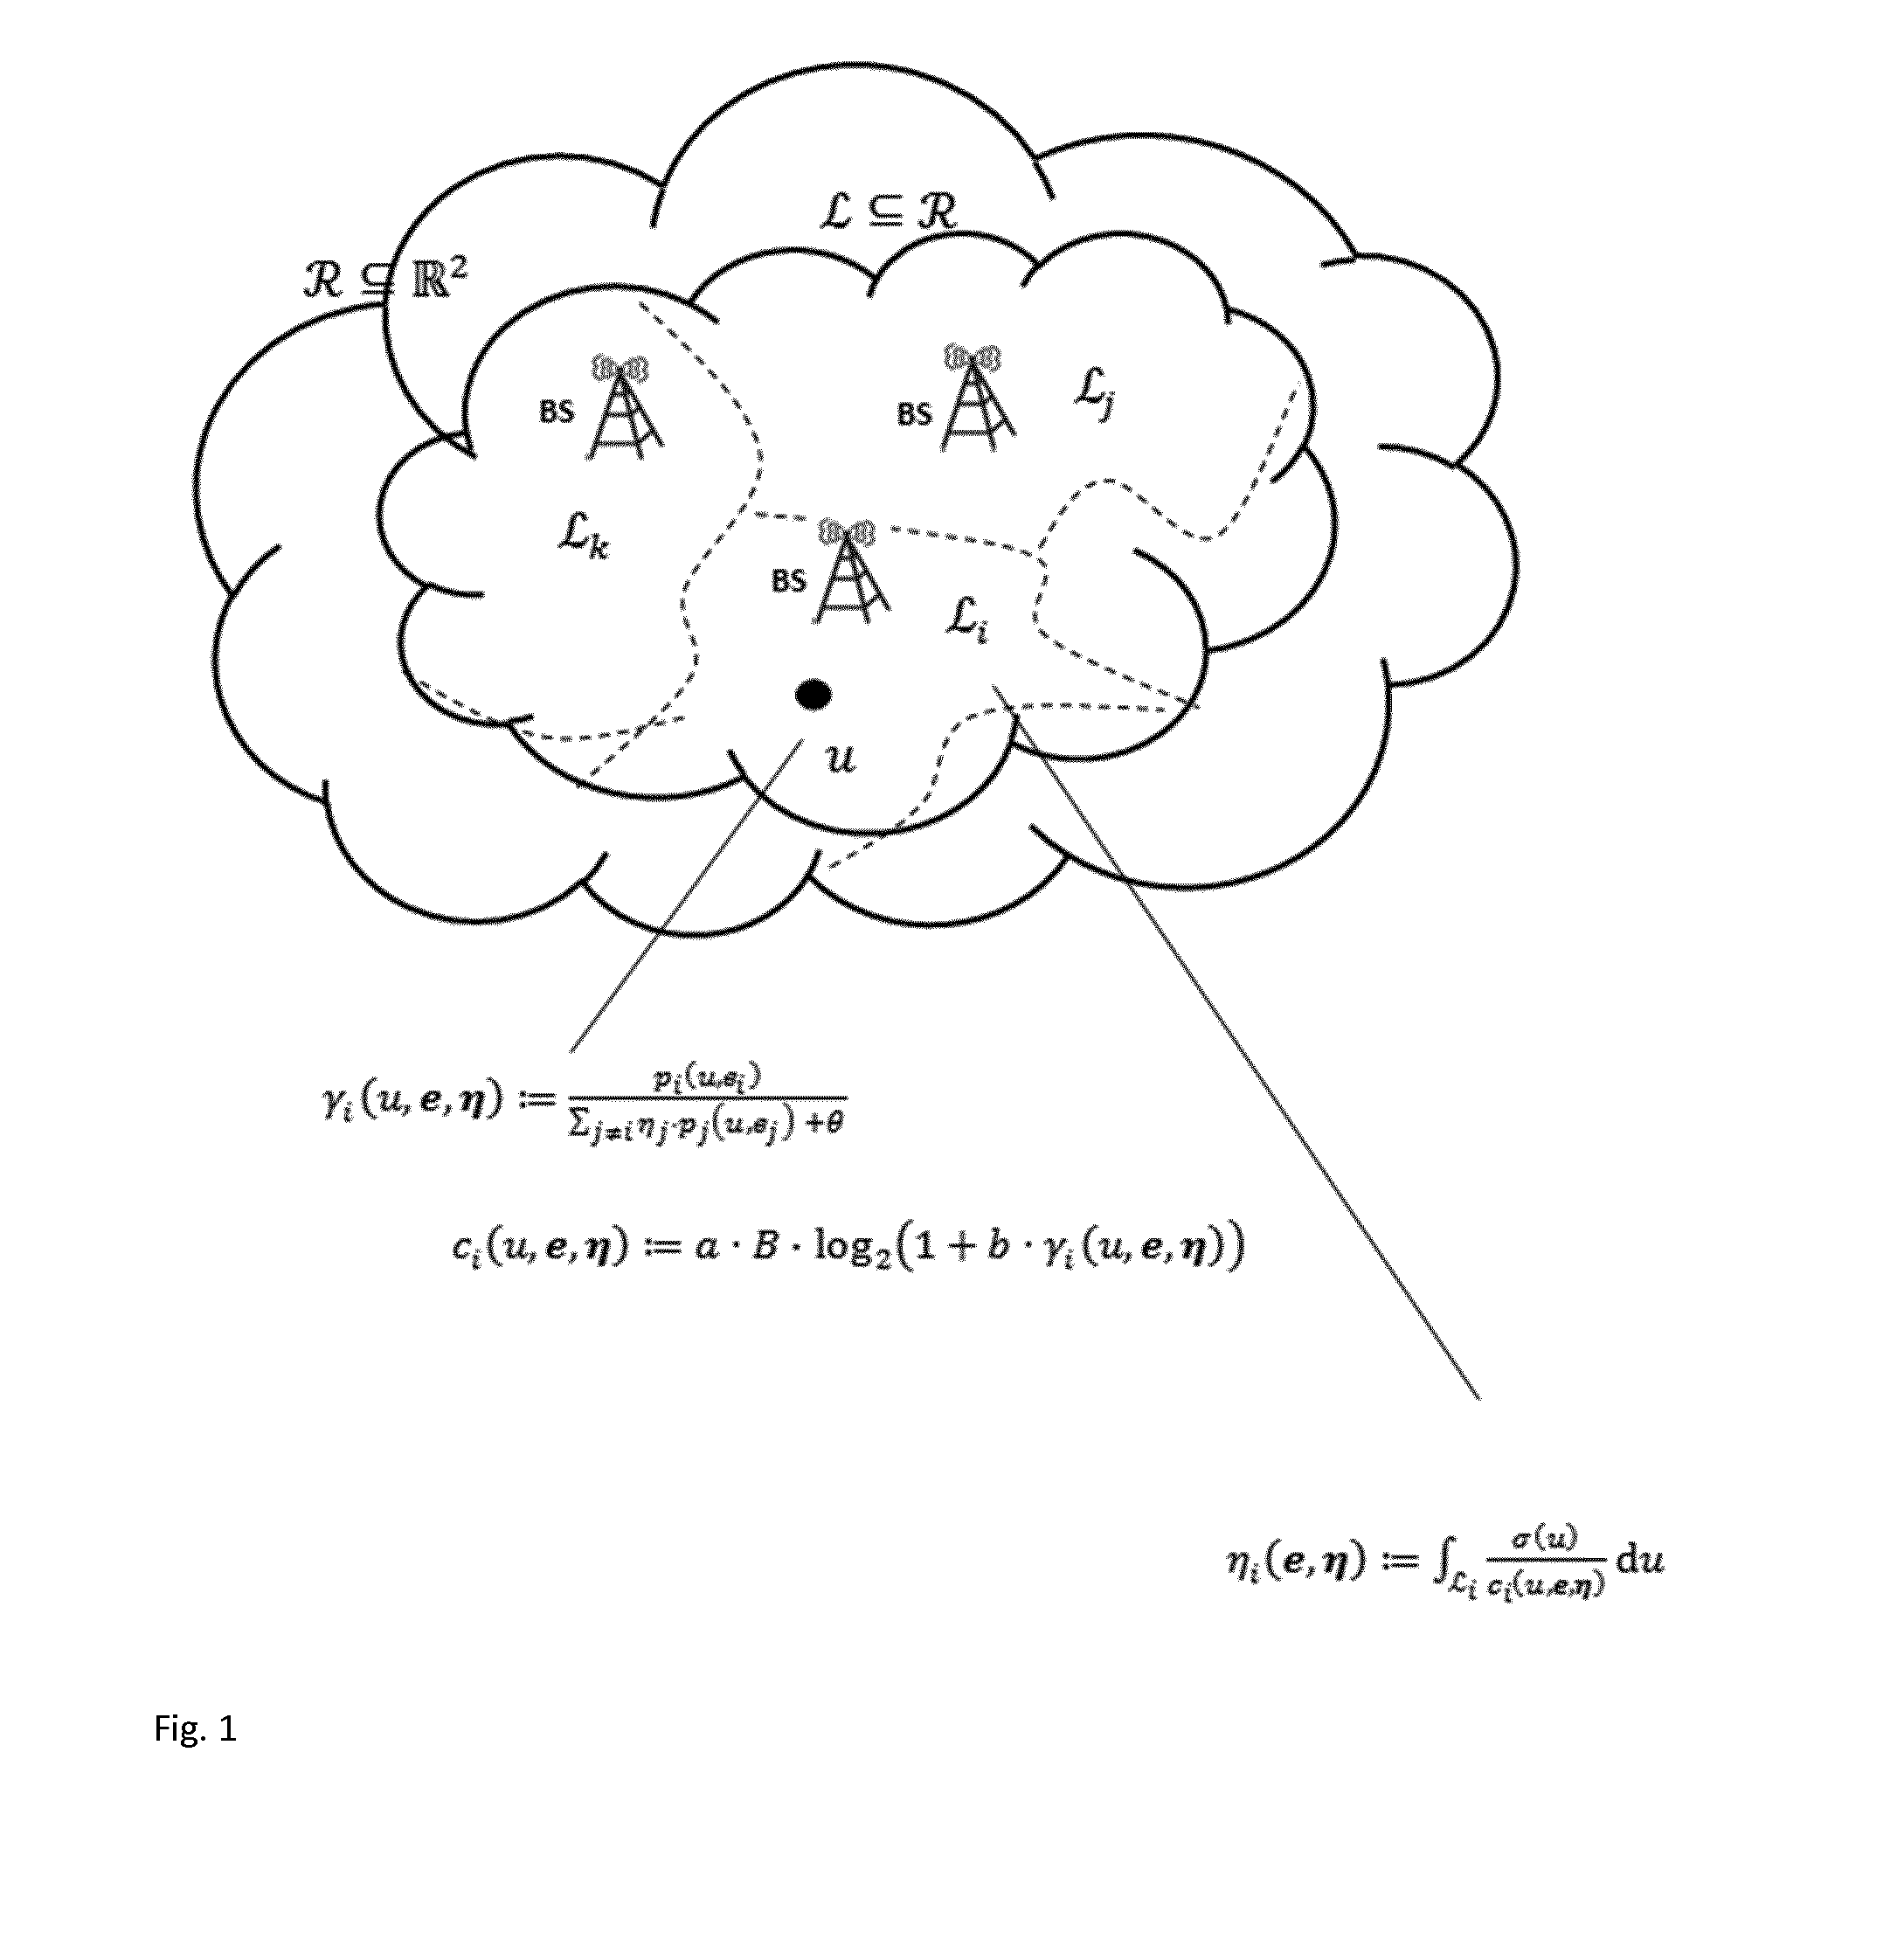 Method for joint and coordinated load balancing and coverage and capacity optimization in cellular communication networks